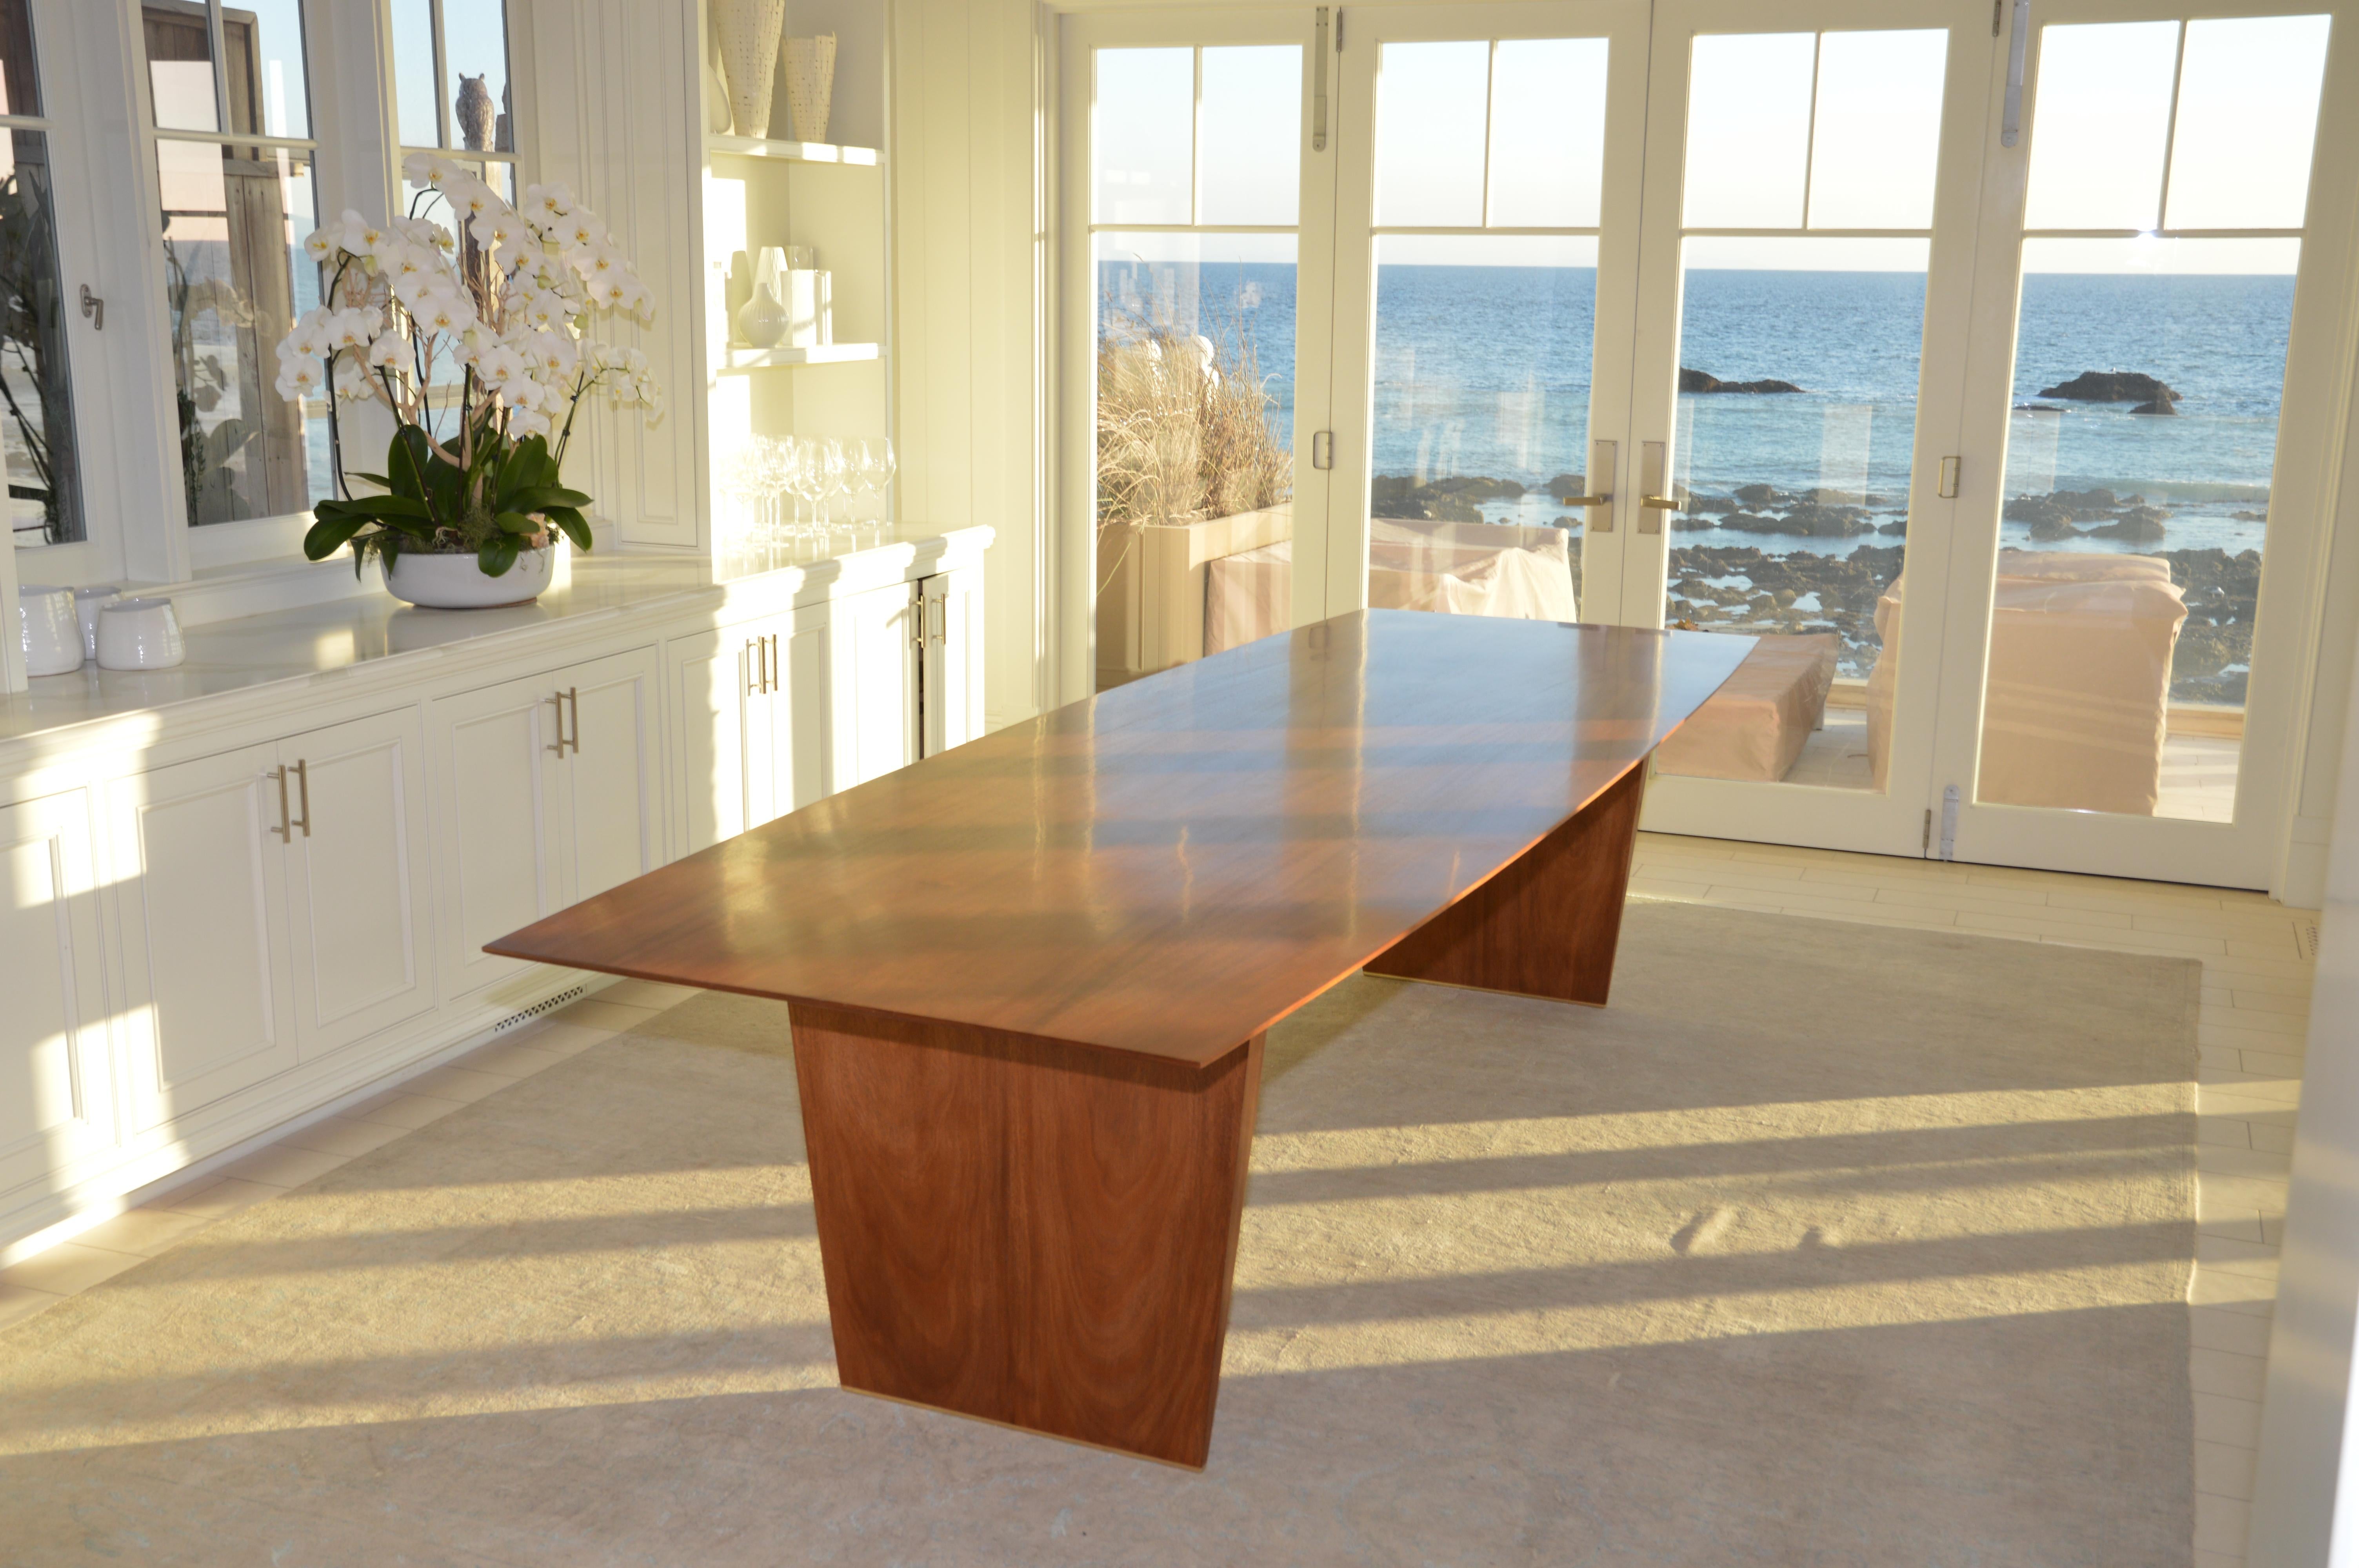 This dining table is made from solid, book-matched African mahogany. Both the top and the legs are book-matched to create a perfectly symmetrical pattern in the wood grain. We designed this table in collaboration with Lauren Gurwich, and with a nod